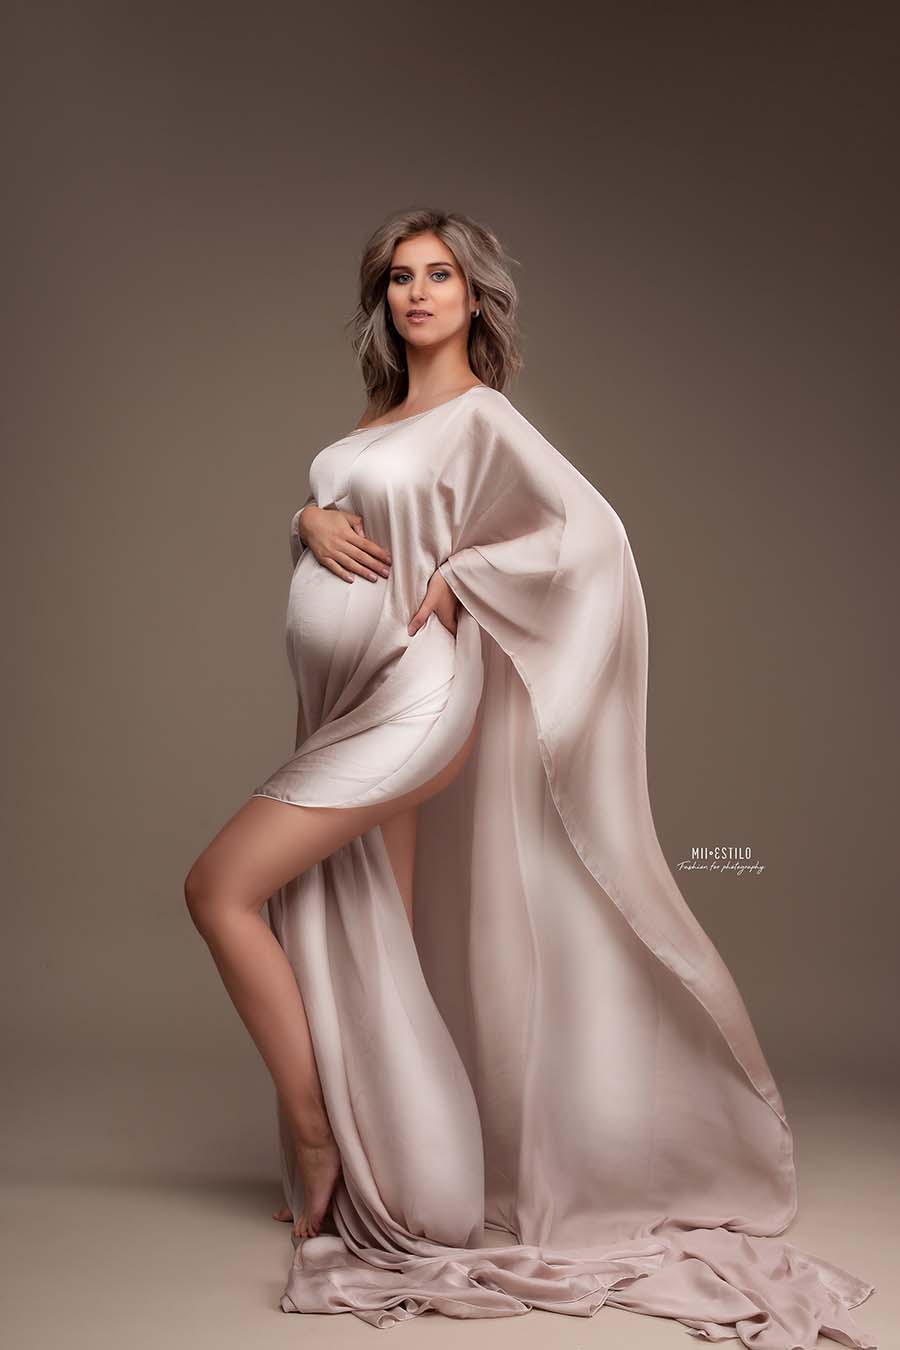 A pregnant model is posing in our amina cape sand. The material of the cape is silky for that nice shiny look. The model has short blonde hair. The fabric is hanging around her and it looks a little big like she is wearing a dress. 